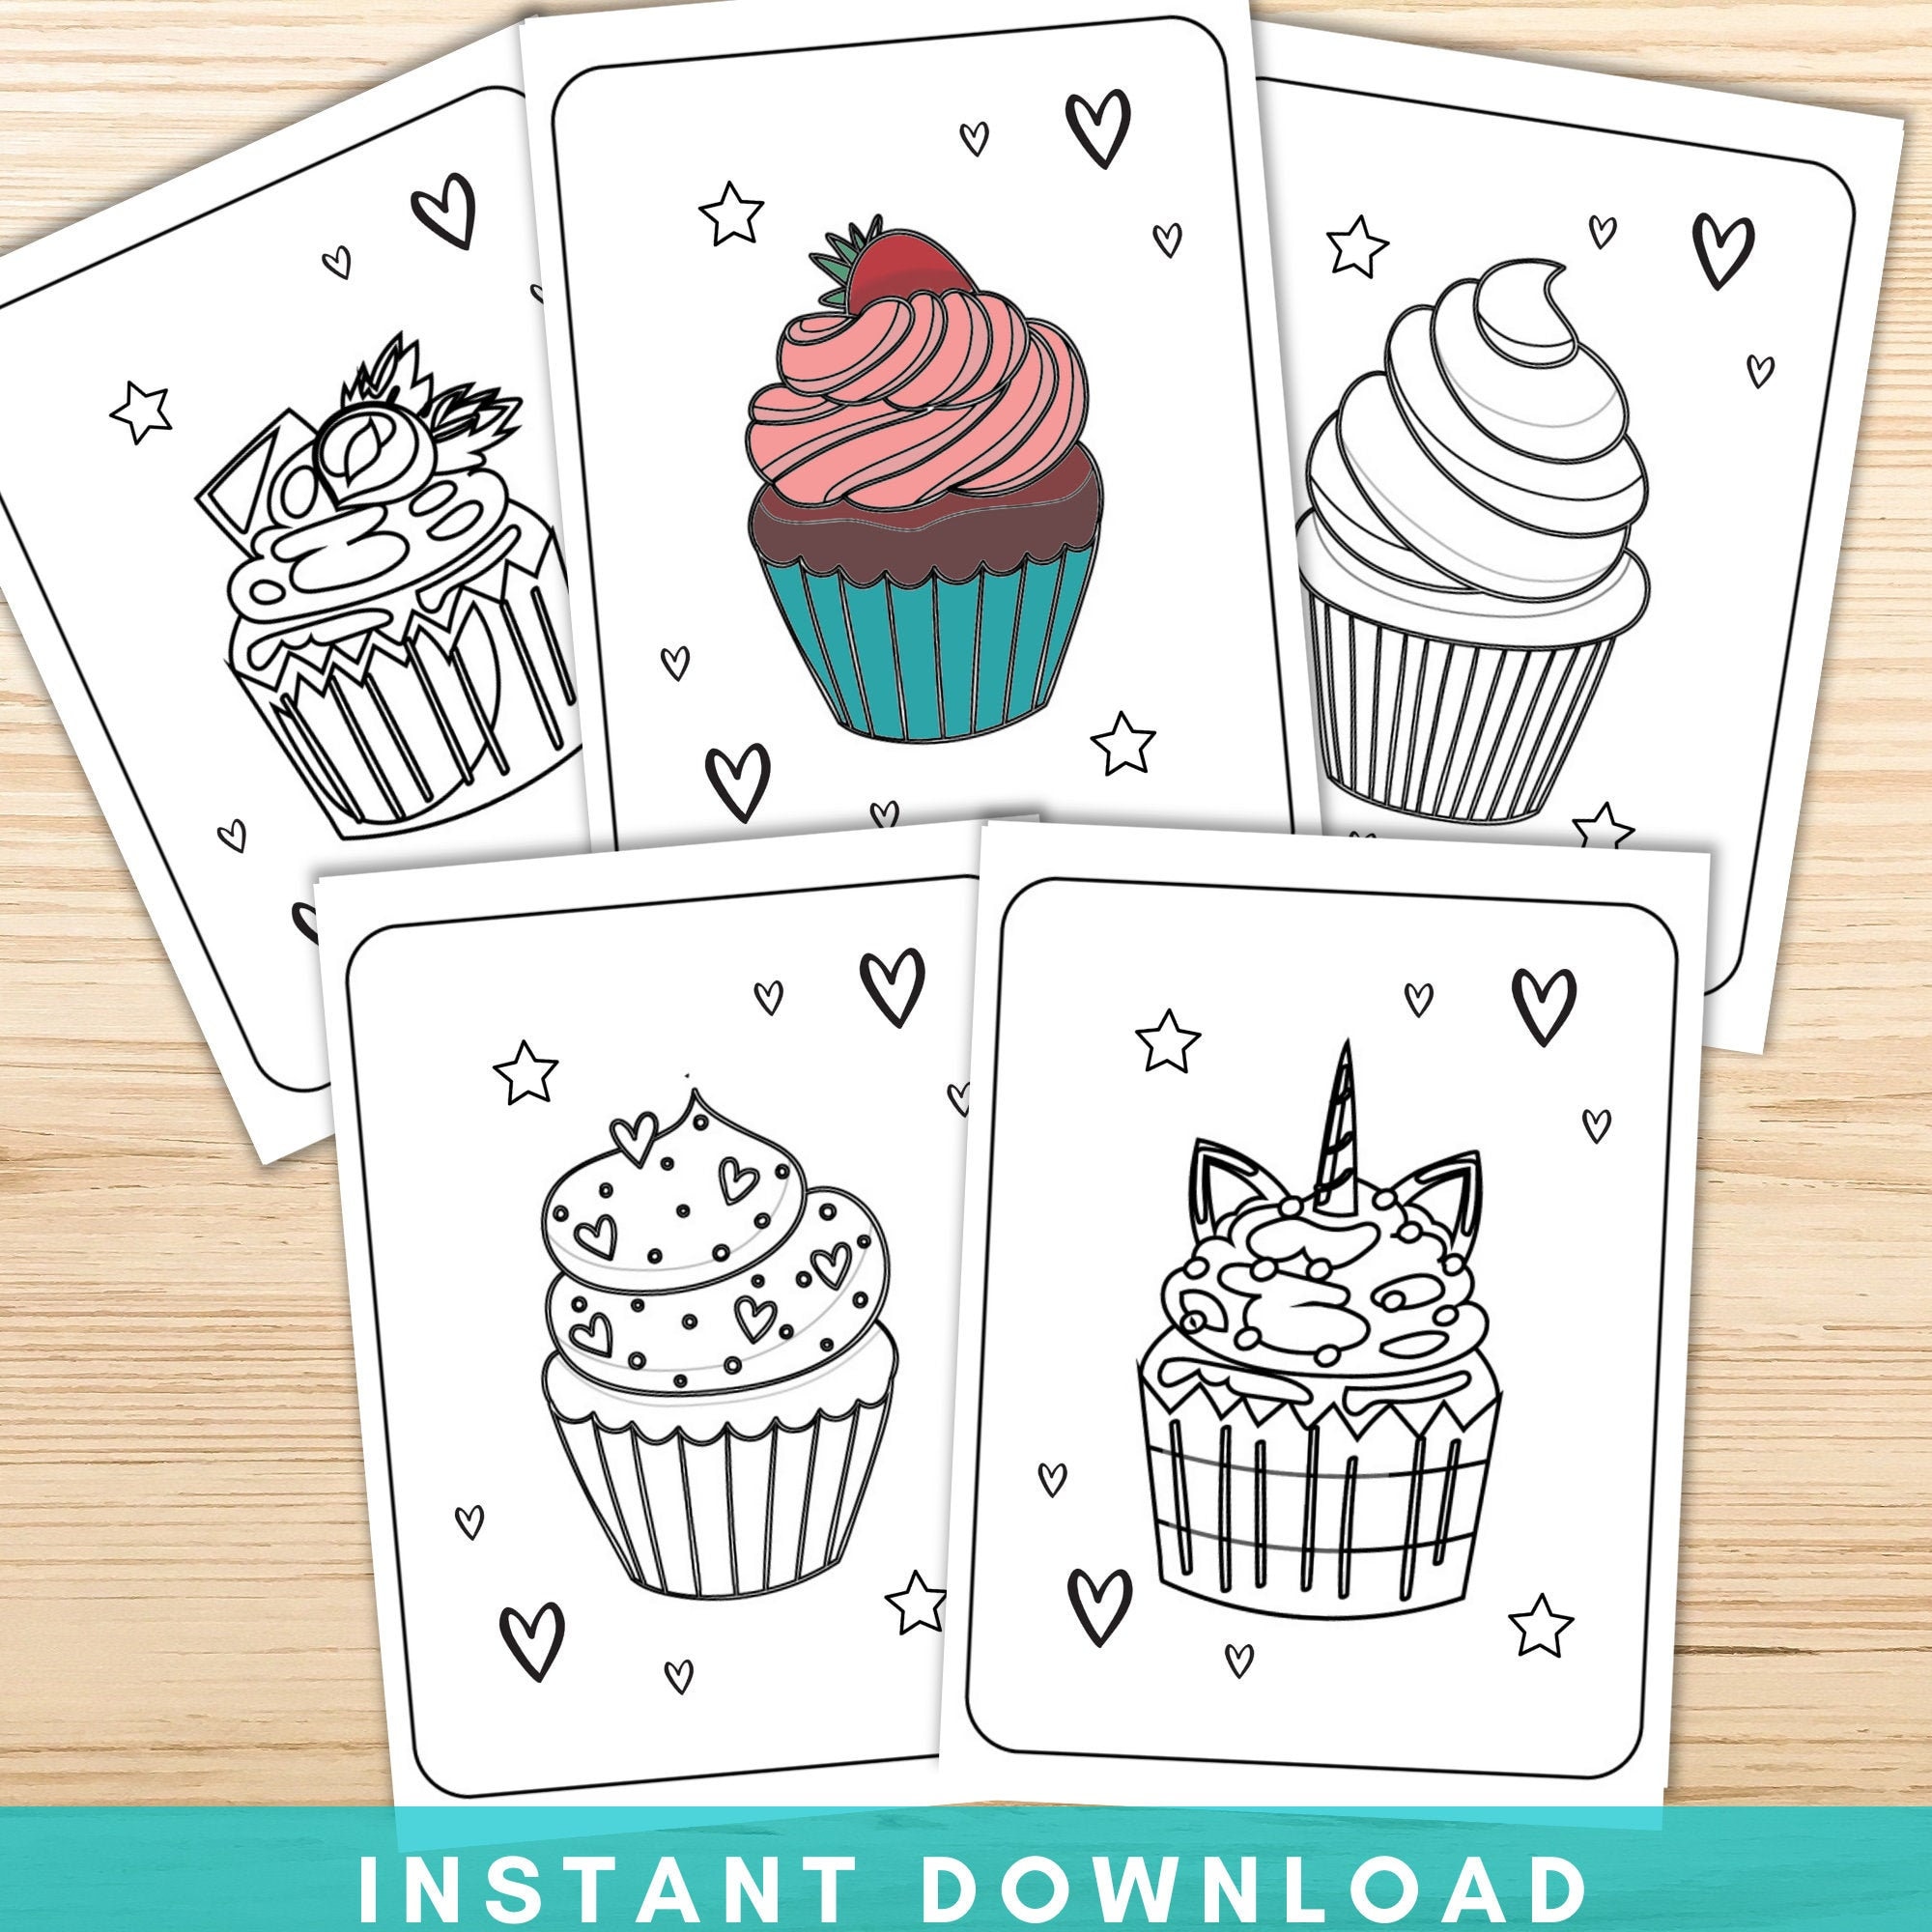 Cupcake coloring pages printable coloring pages cupcake birthday party activity birthday party kids coloring pages